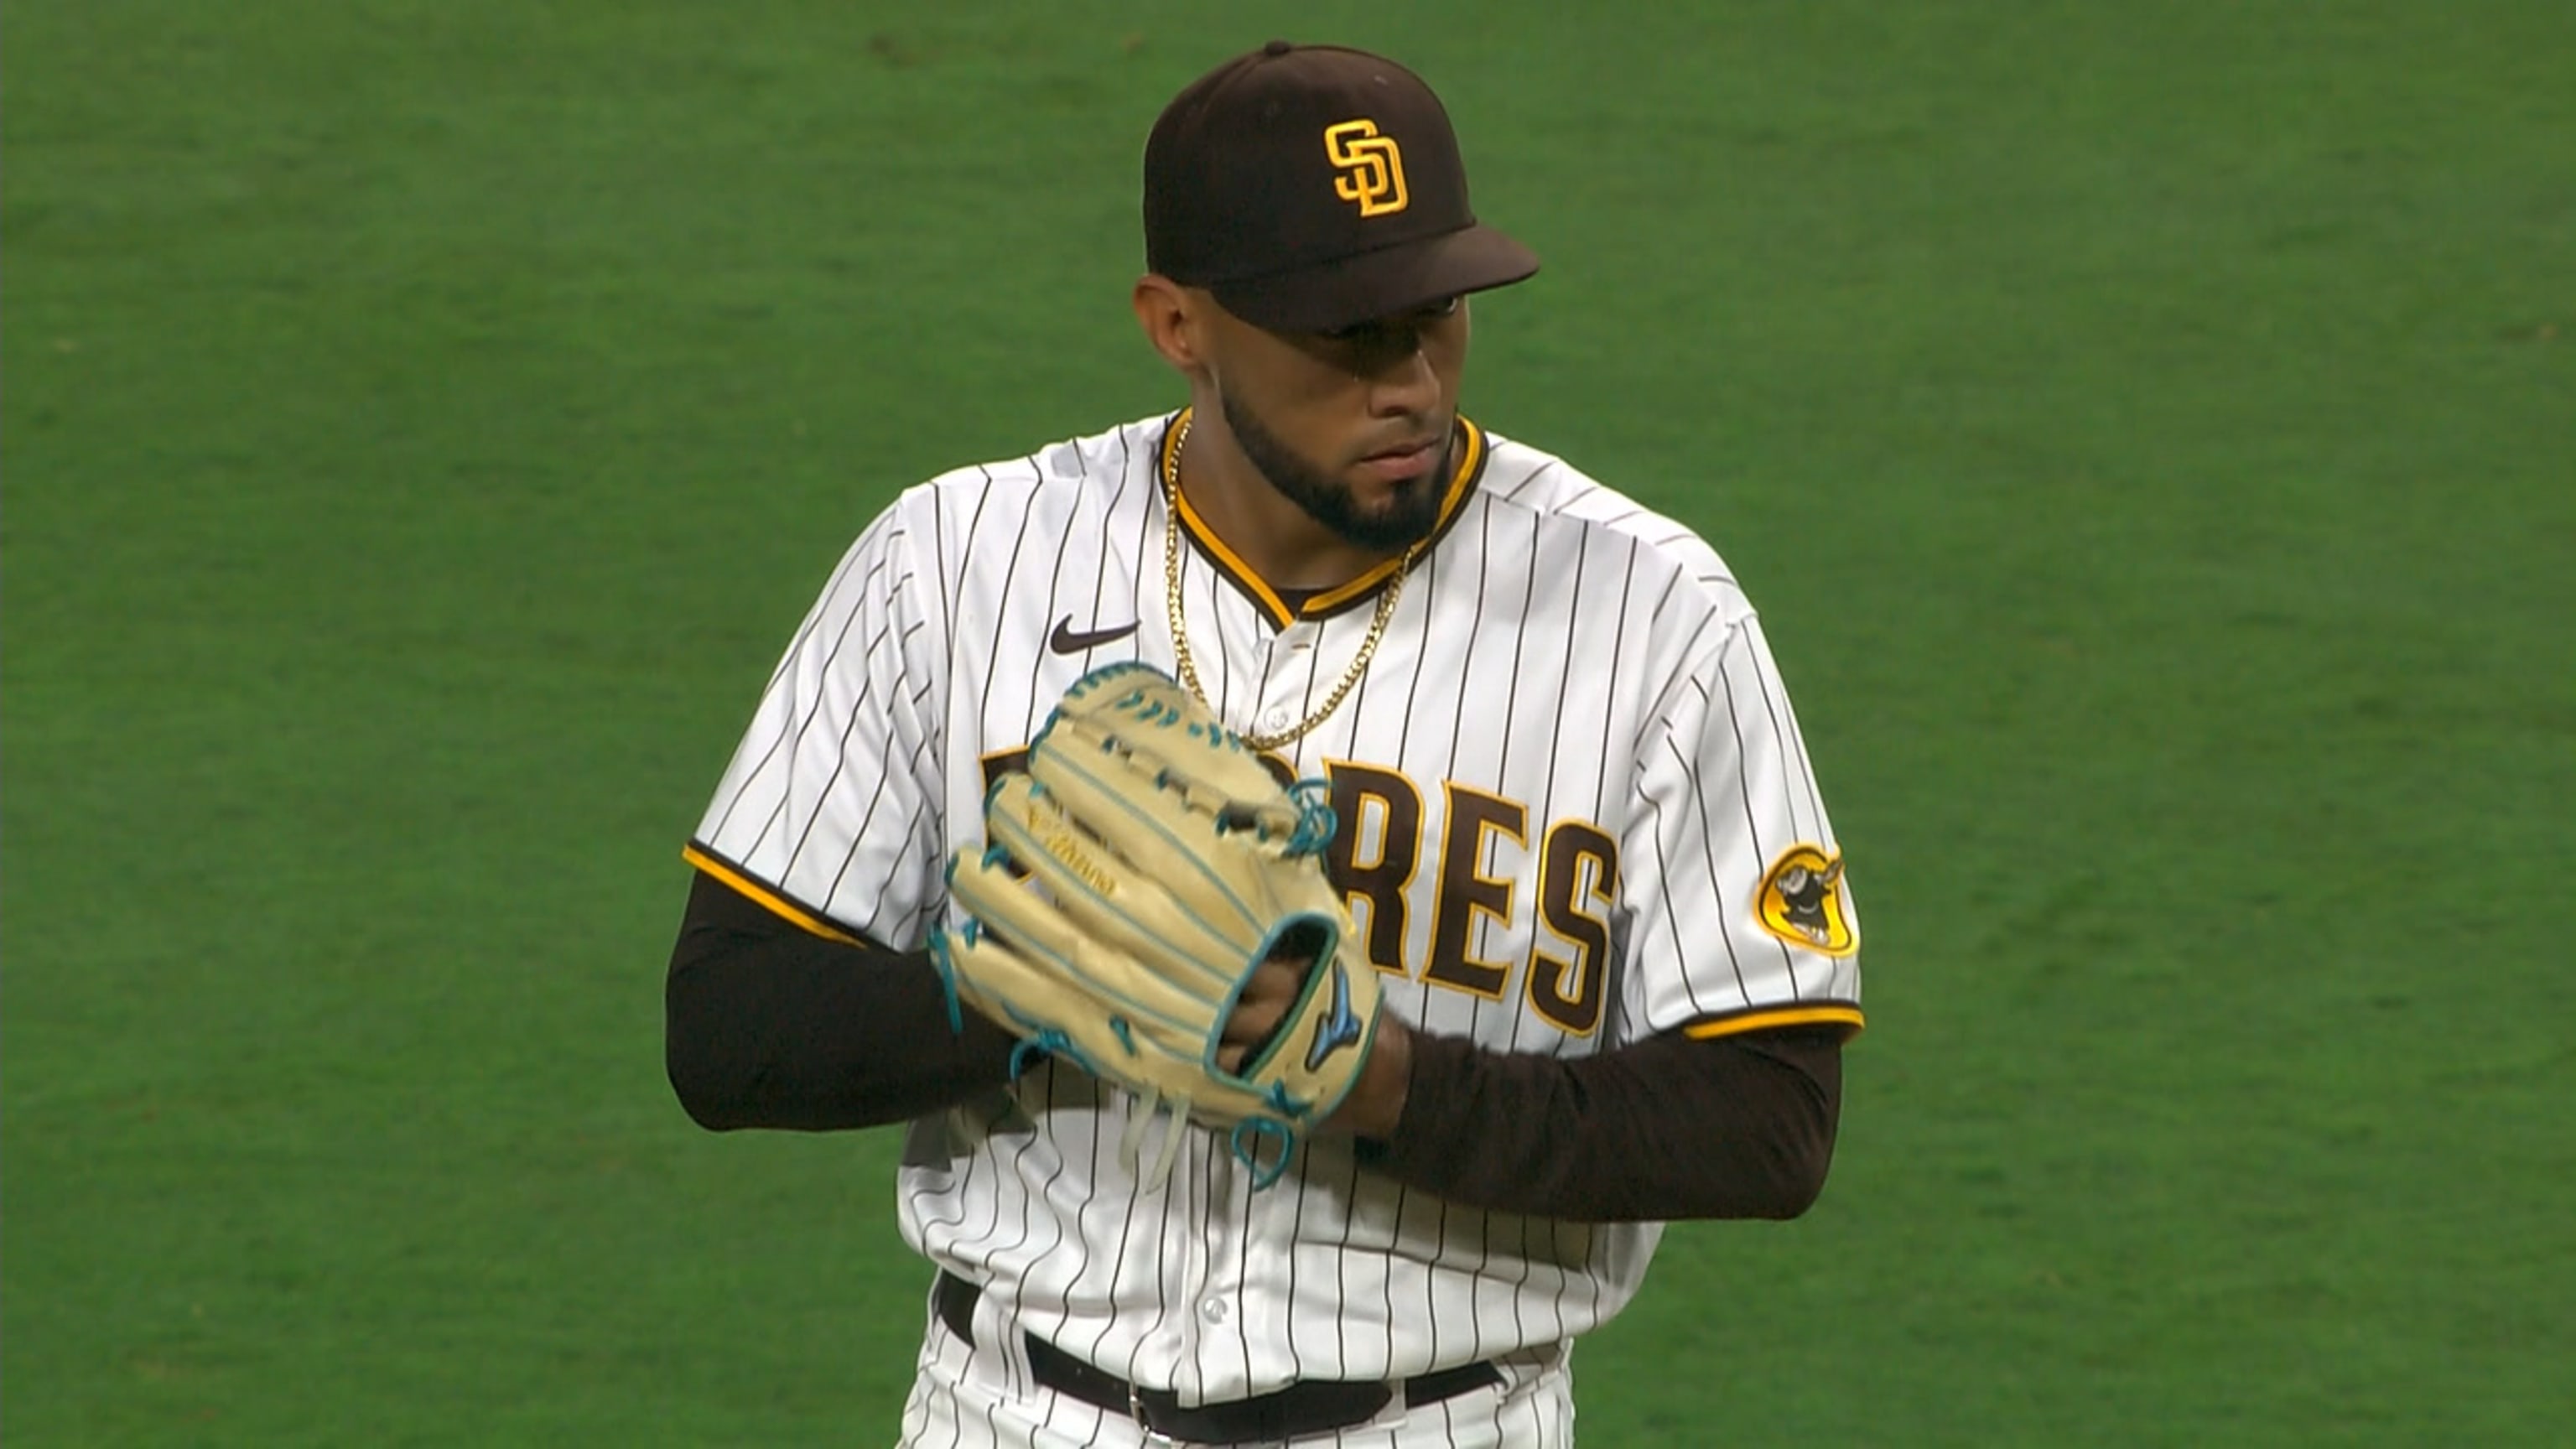 Padres reliever Robert Suárez suspended for 10 games, 6th pitcher penalized  for sticky stuff